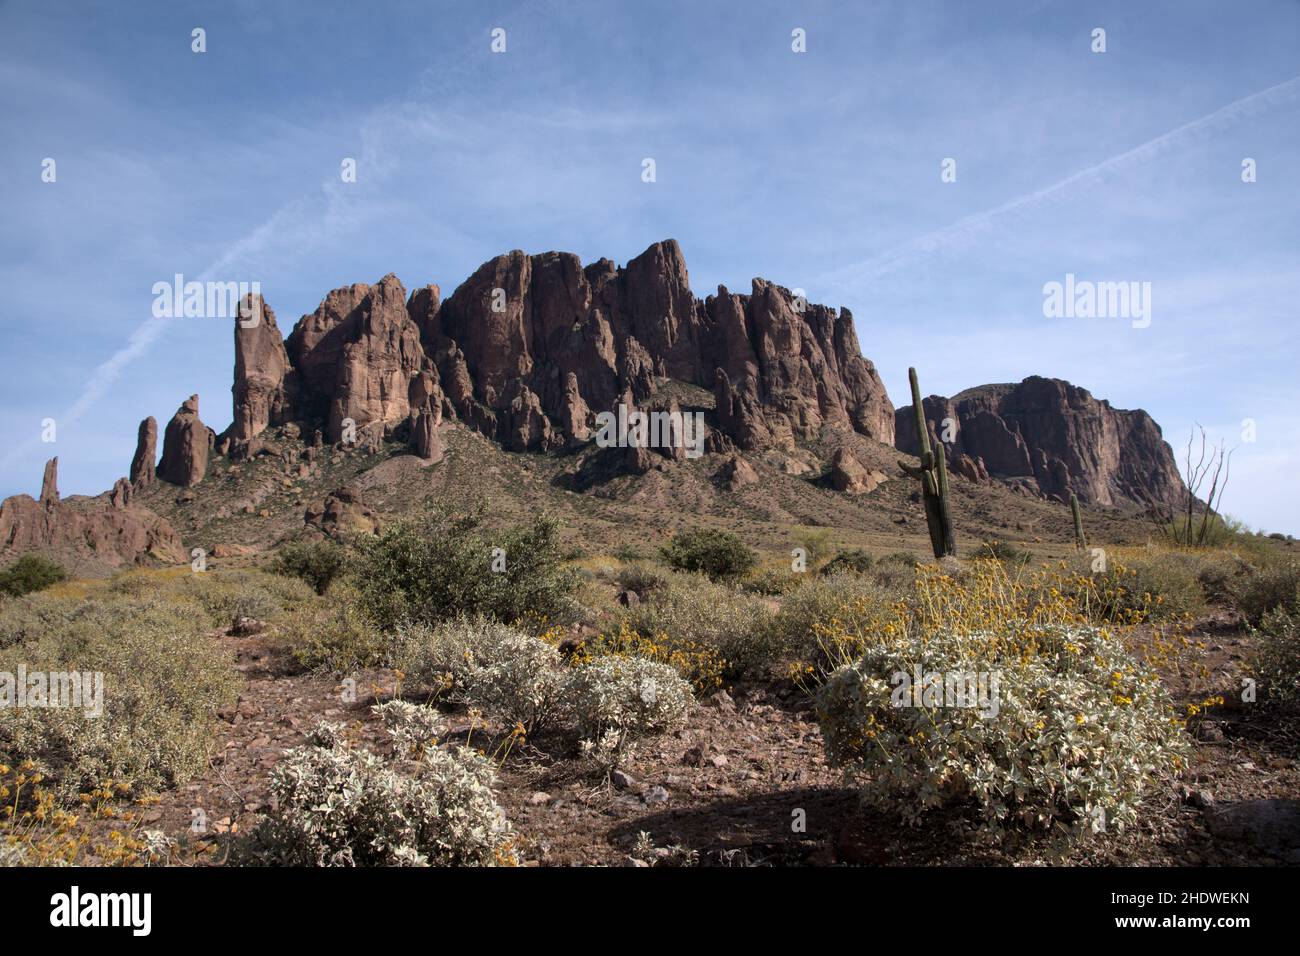 arizona, lost dutchman state park, superstition mountains, arizonas, superstition mountain, superstitions, the superstitions Stock Photo